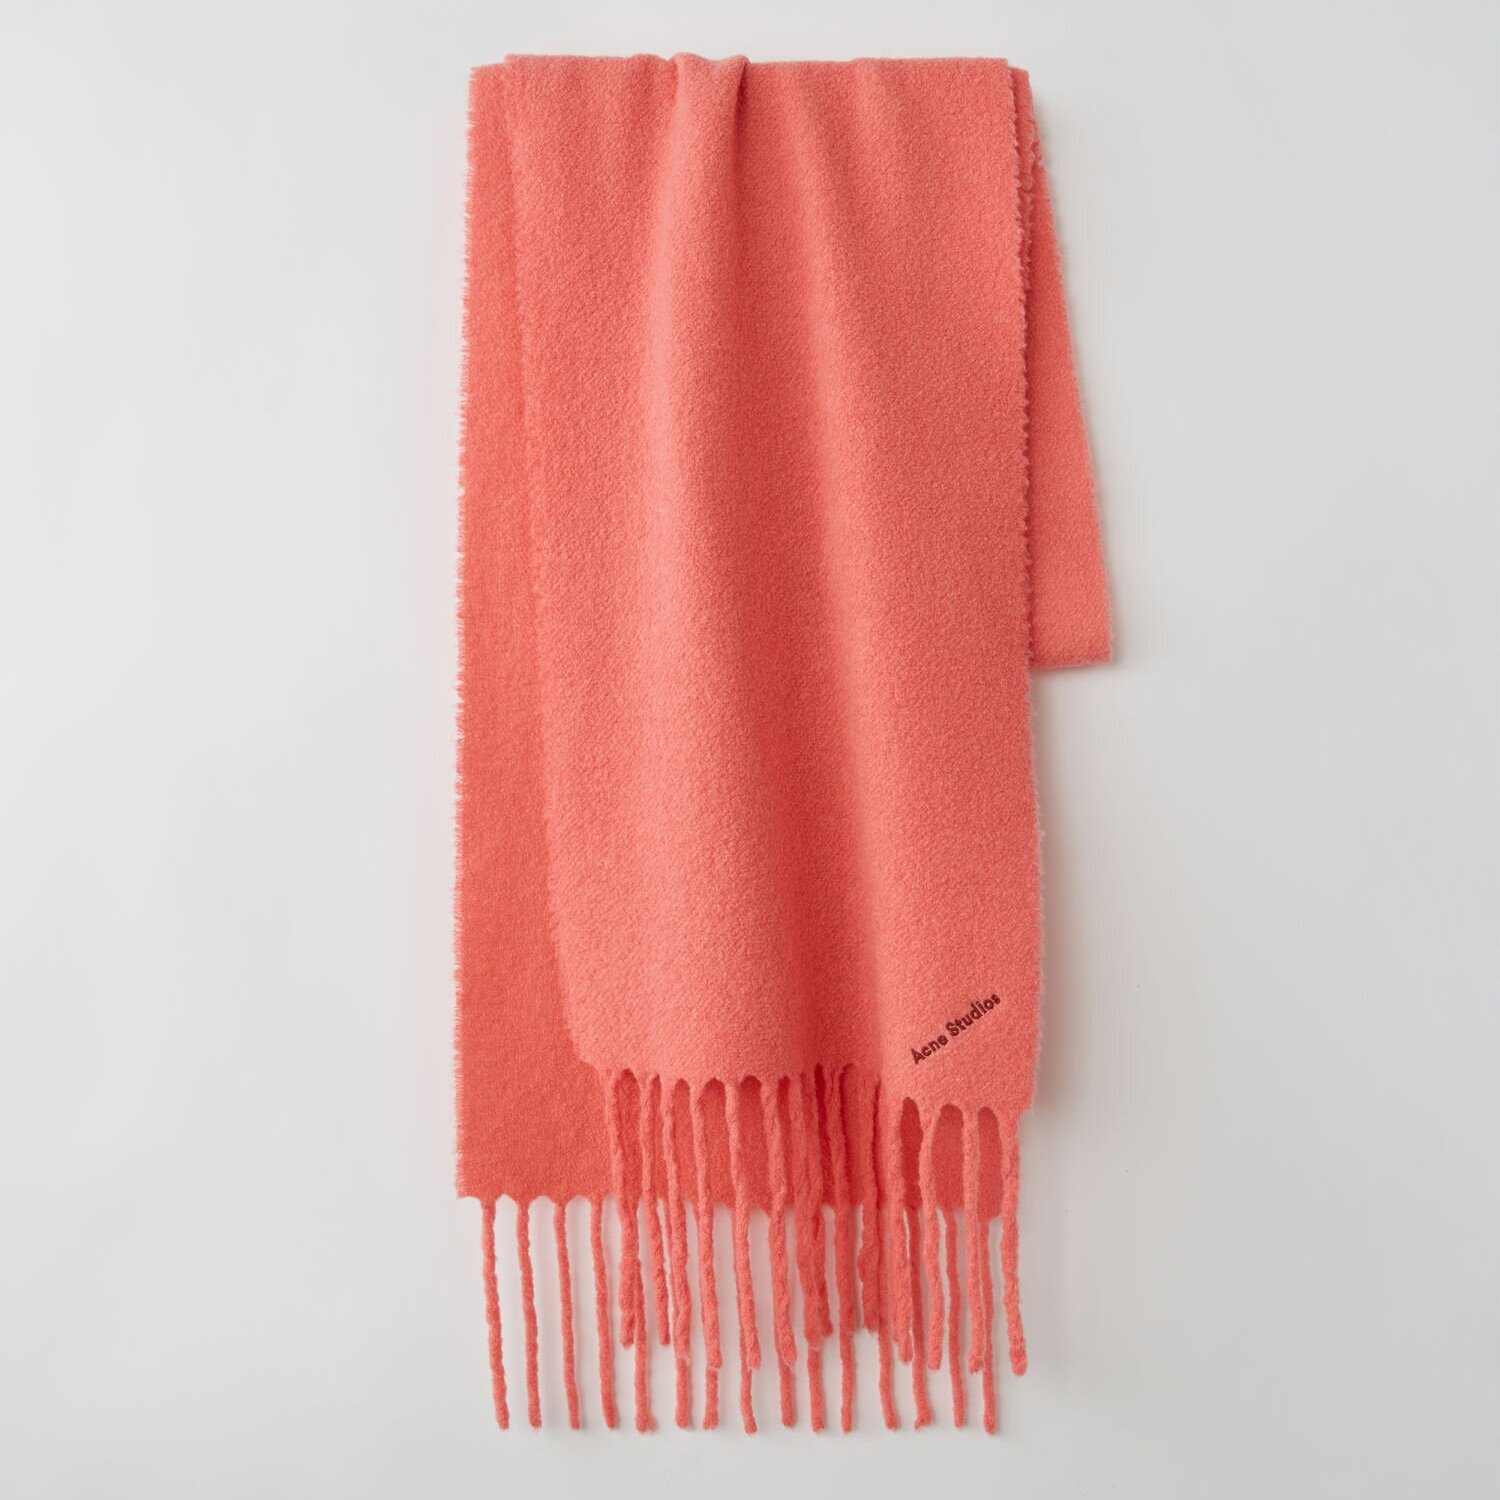  Boiled wool-blend scarf coral red -  Acne Studios  